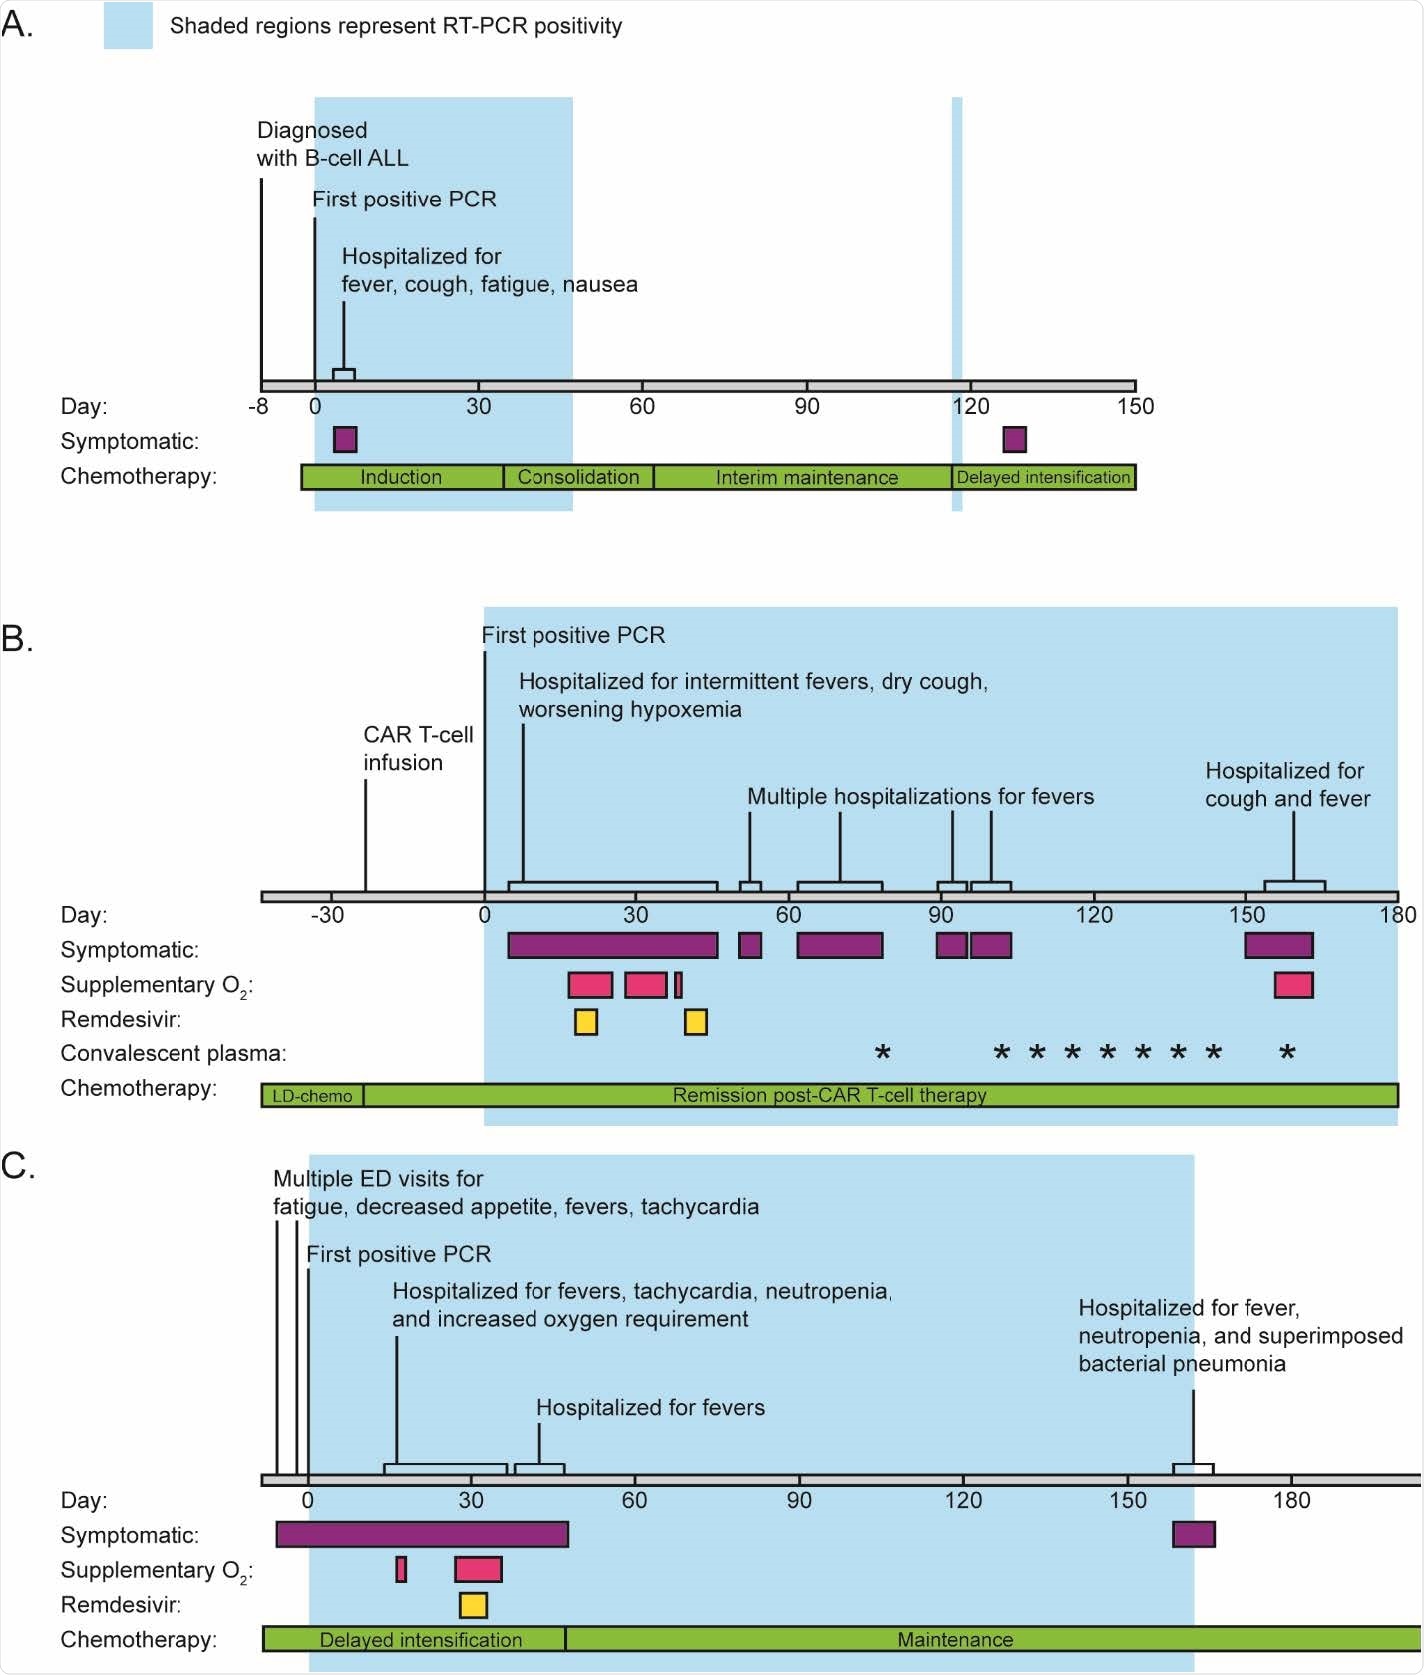 Clinical timeline of symptoms, hospital admissions, and treatment. Timelines for patient 1 (A), patient 2 (B), and patient 3 (C) are labelled by date from initial positive RT-PCR (day 0). Colored bars indicate time periods where patients were symptomatic, required supplementary oxygen, or received treatment (Remdesivir or convalescent plasma). The phases of chemotherapy are also shown.